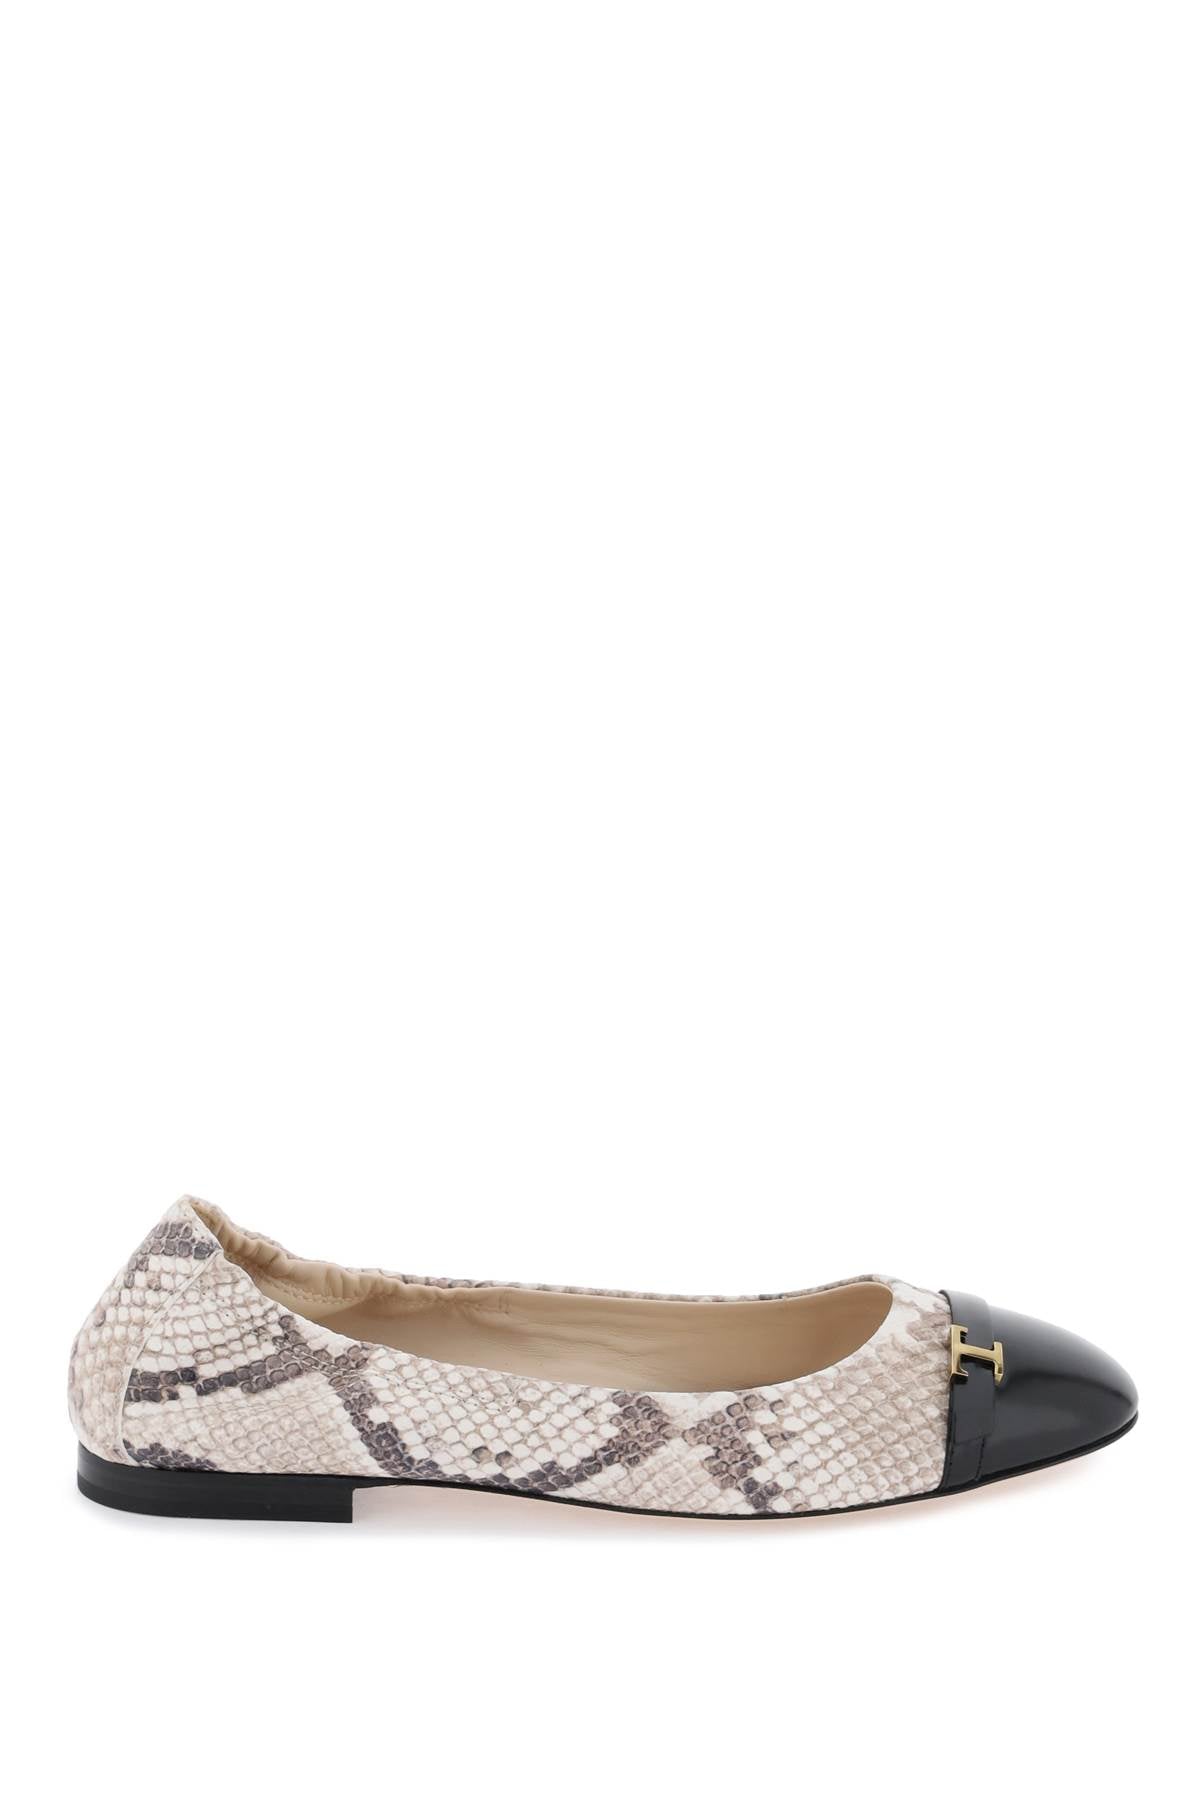 Tod'S Tod's snake-printed leather ballet flats